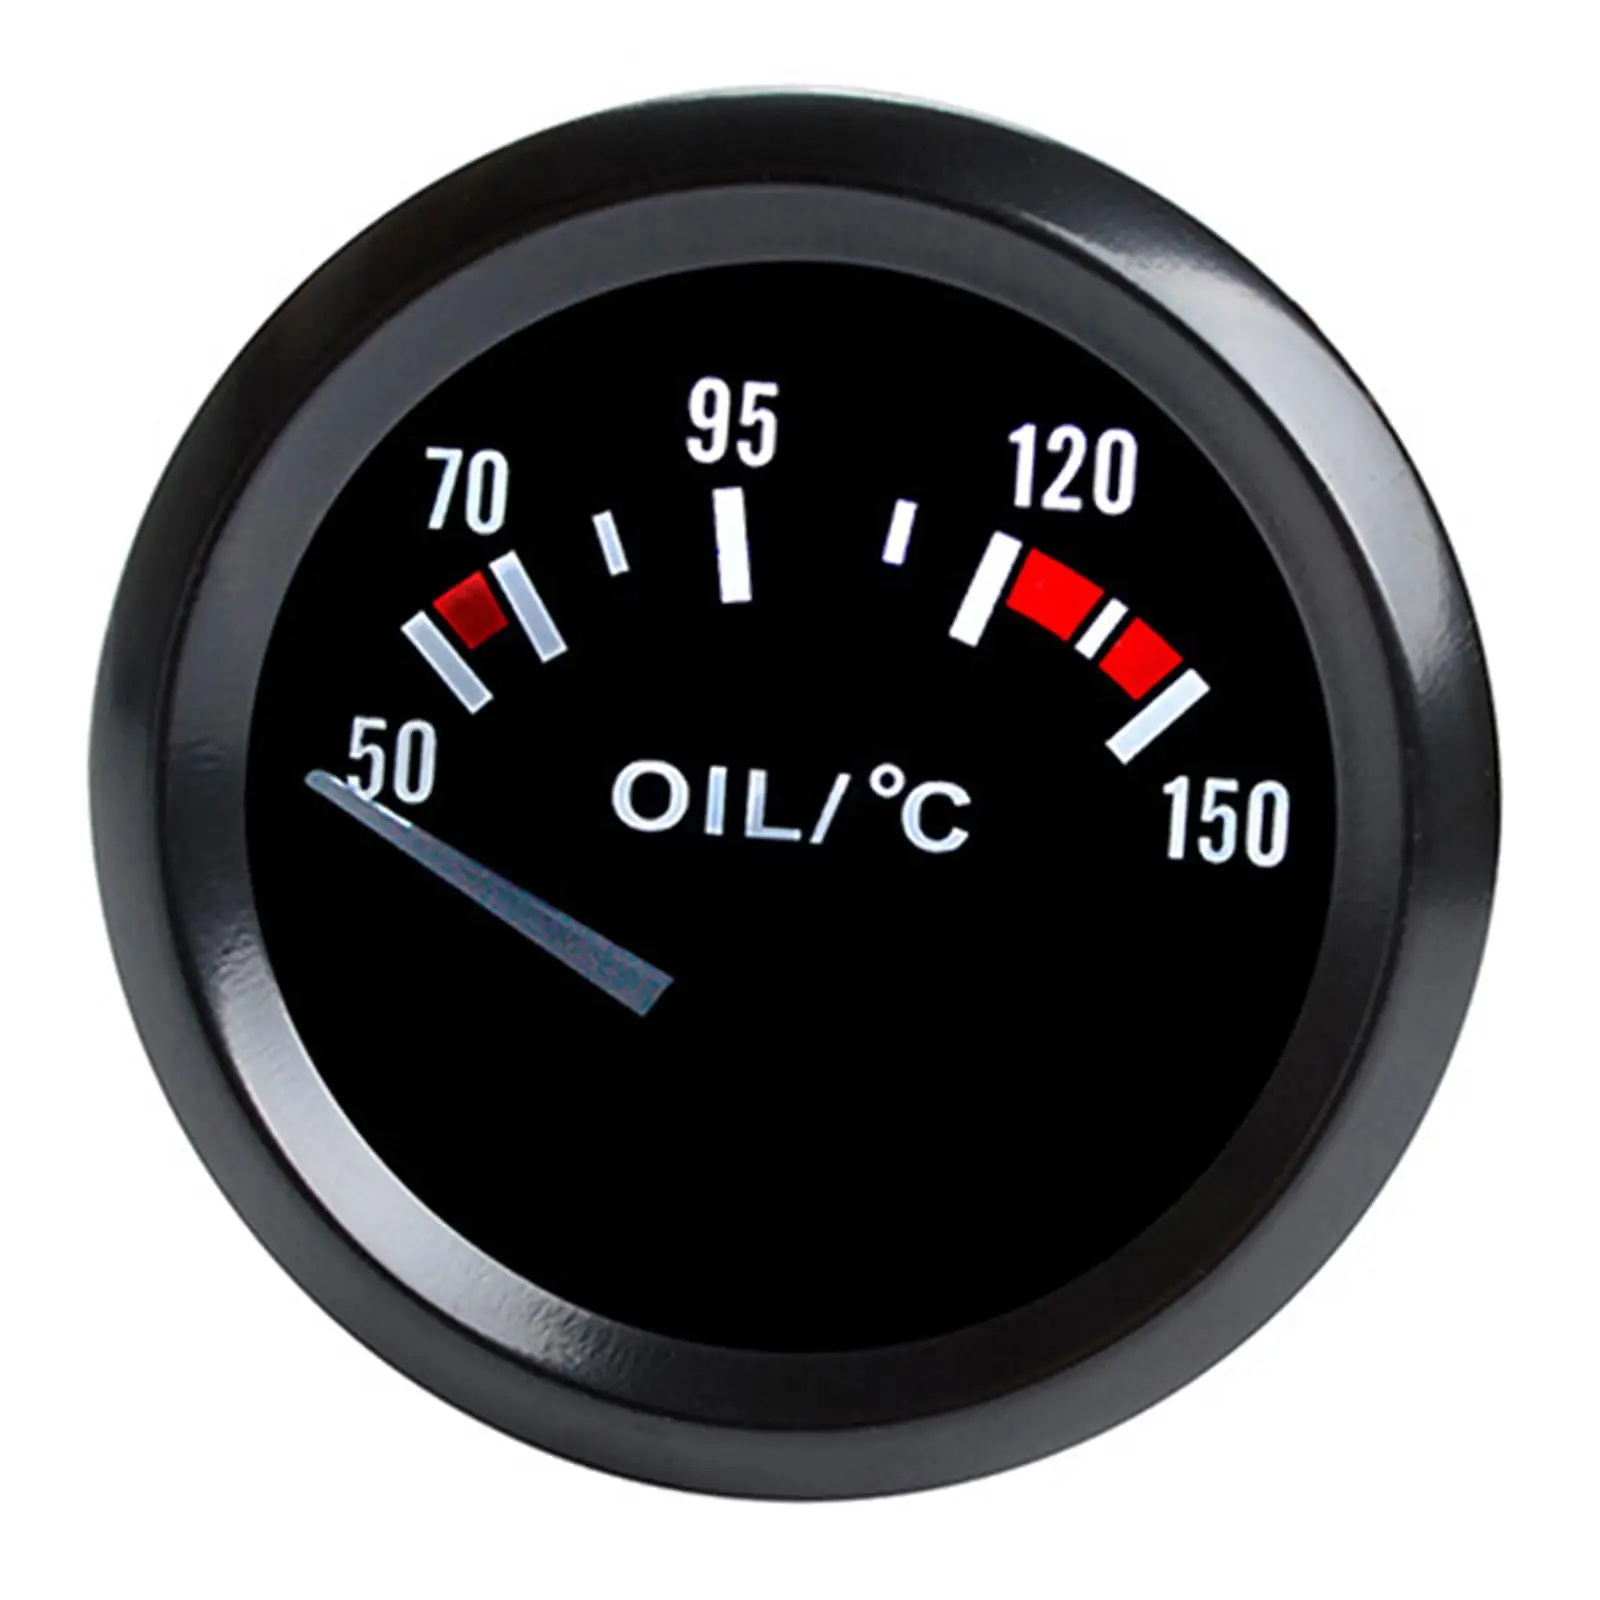 Oil Temp Gauge High Performance 2 inch 52mm for Car Vehicle Automotive